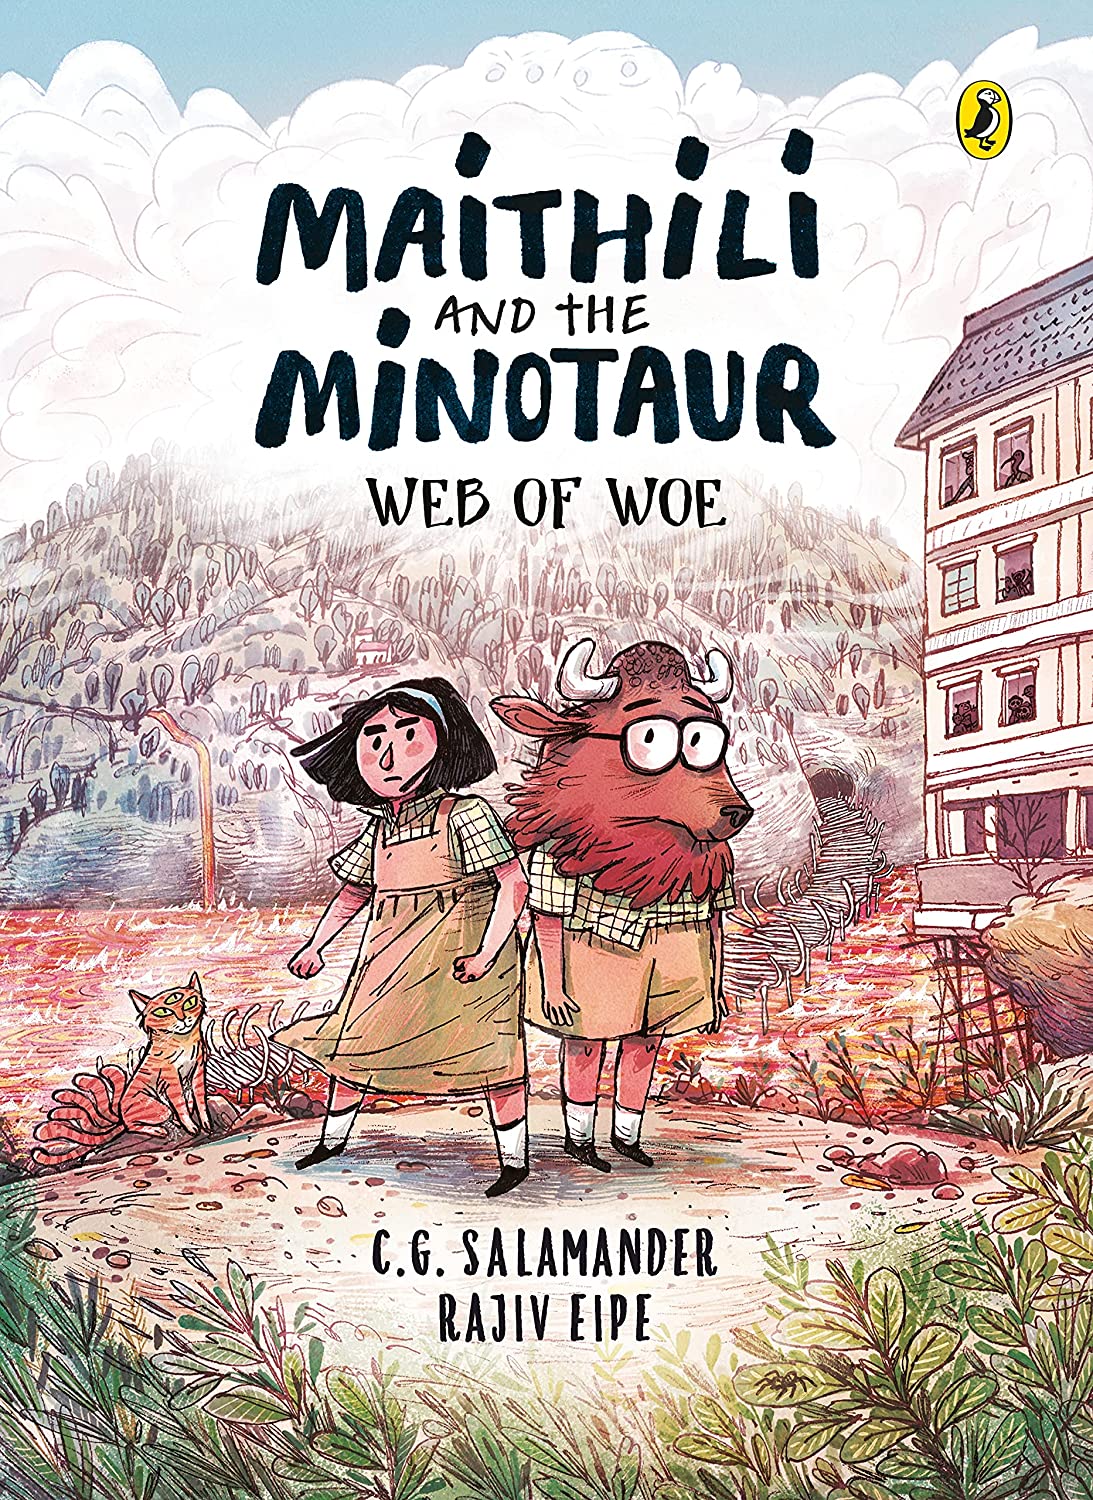 Cover of Maithili and the Minotaur: Web of Woe featuring an illustration of a determined-looking young girl in a dress next to a nerdy looking minotaur with the body of a human and a cat with three eyes and a building in the background. They are among a lush natural landscape with a body of water and bridge across it in the background with clouds in the sky.